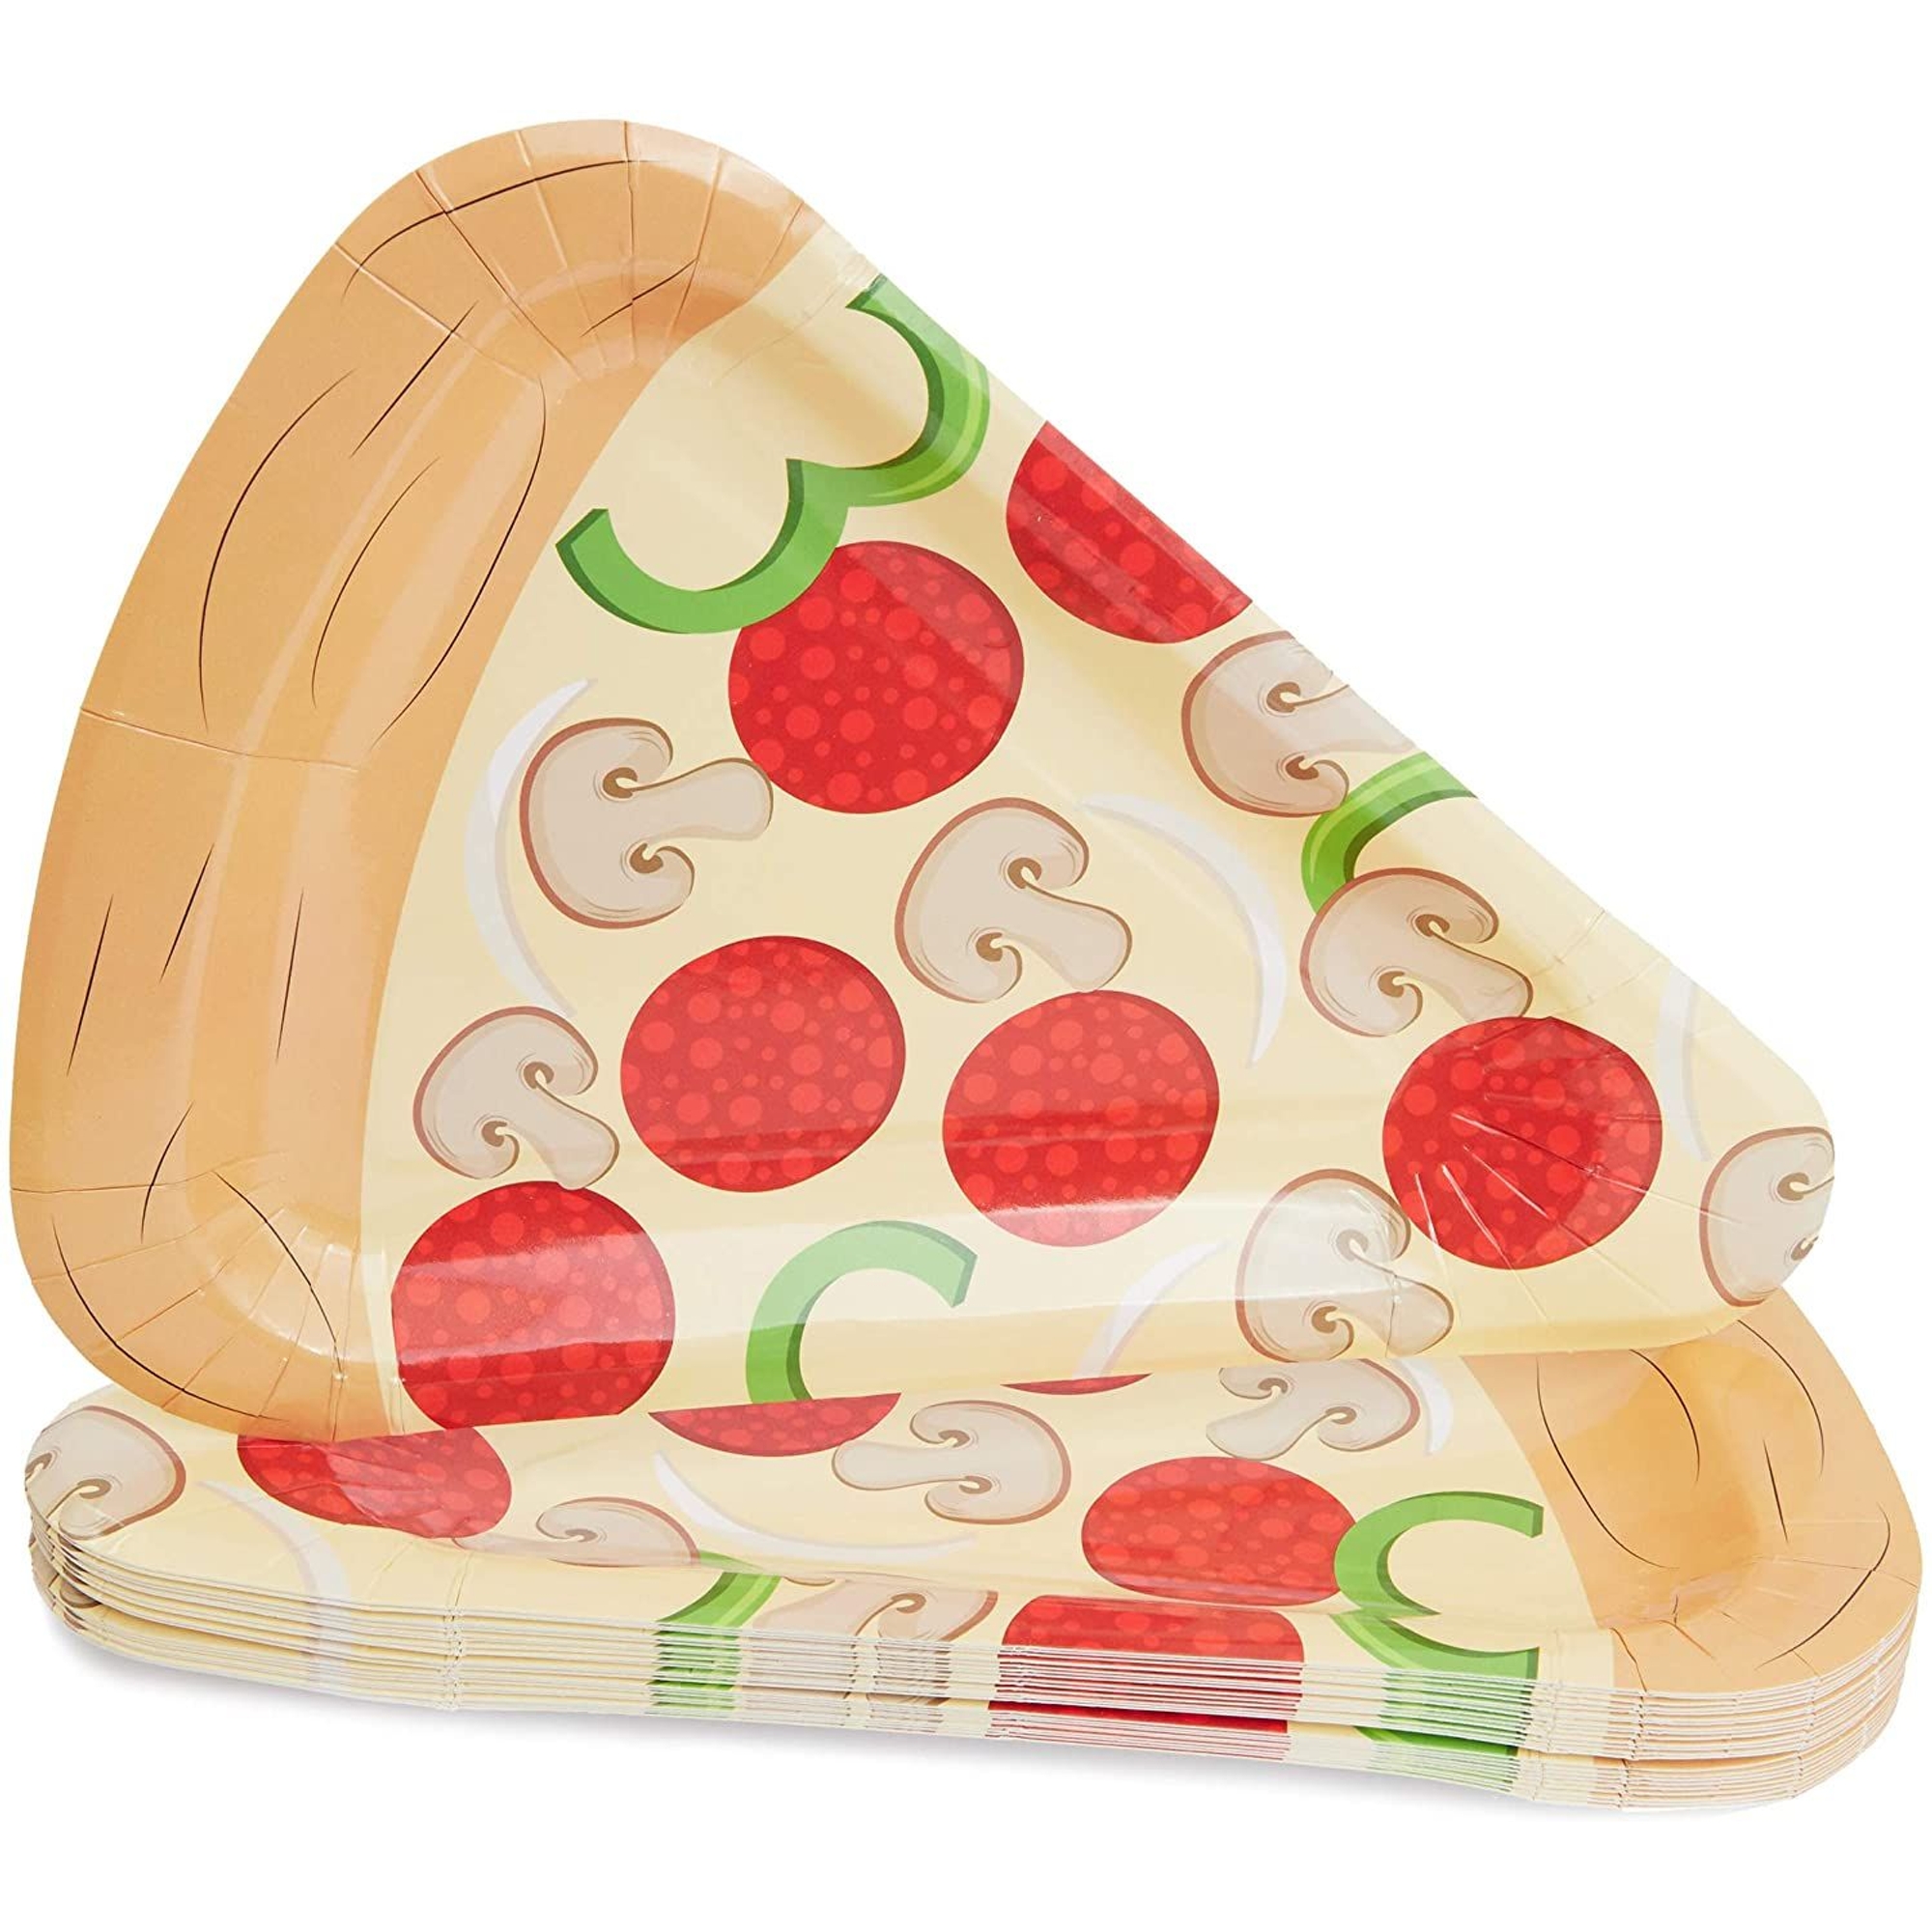 Pizza Party Supplies Kit, Includes Plates, Napkins and Cups (Serves 24 Guests) - image 5 of 8